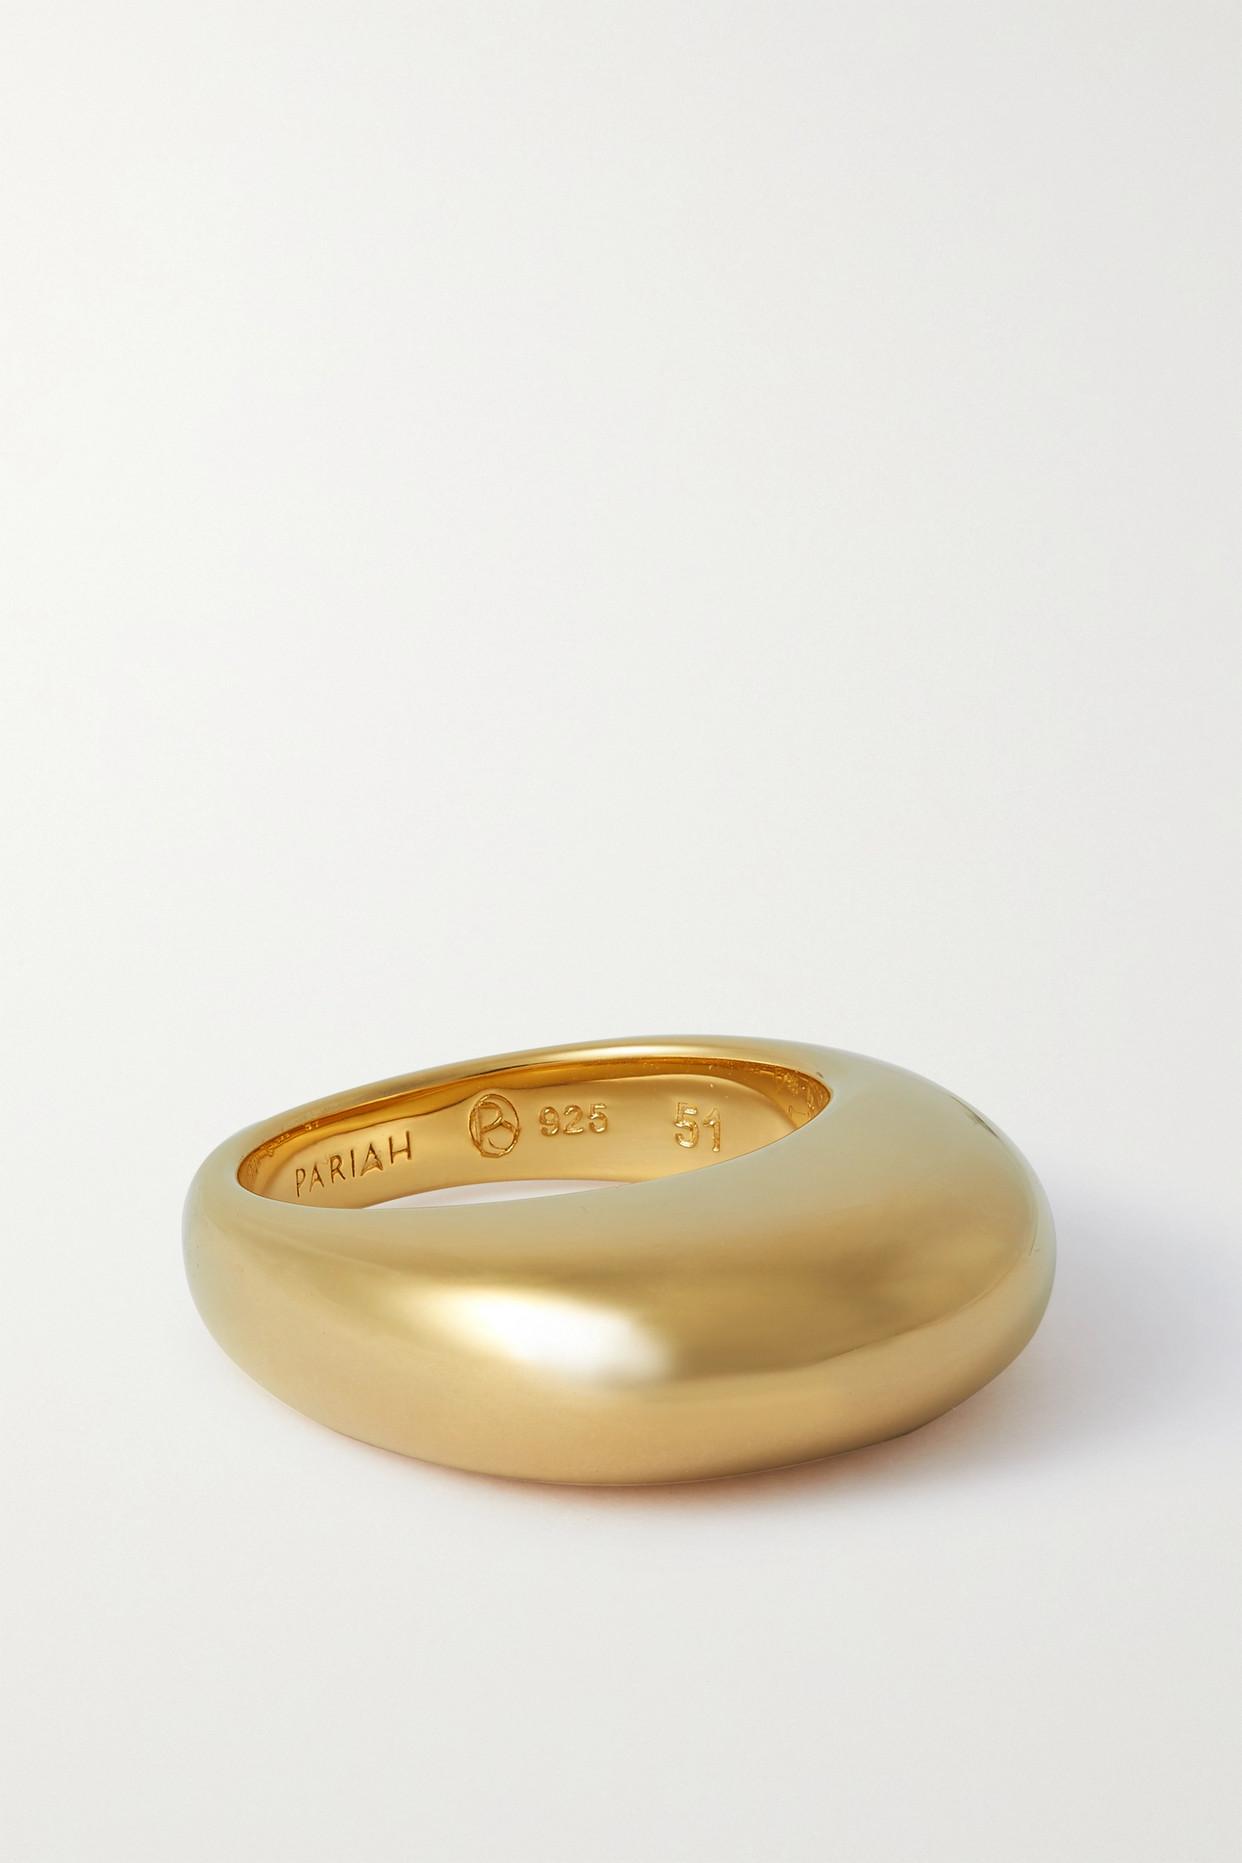 BY PARIAH The Curve Recycled Gold Vermeil Ring in Natural | Lyst